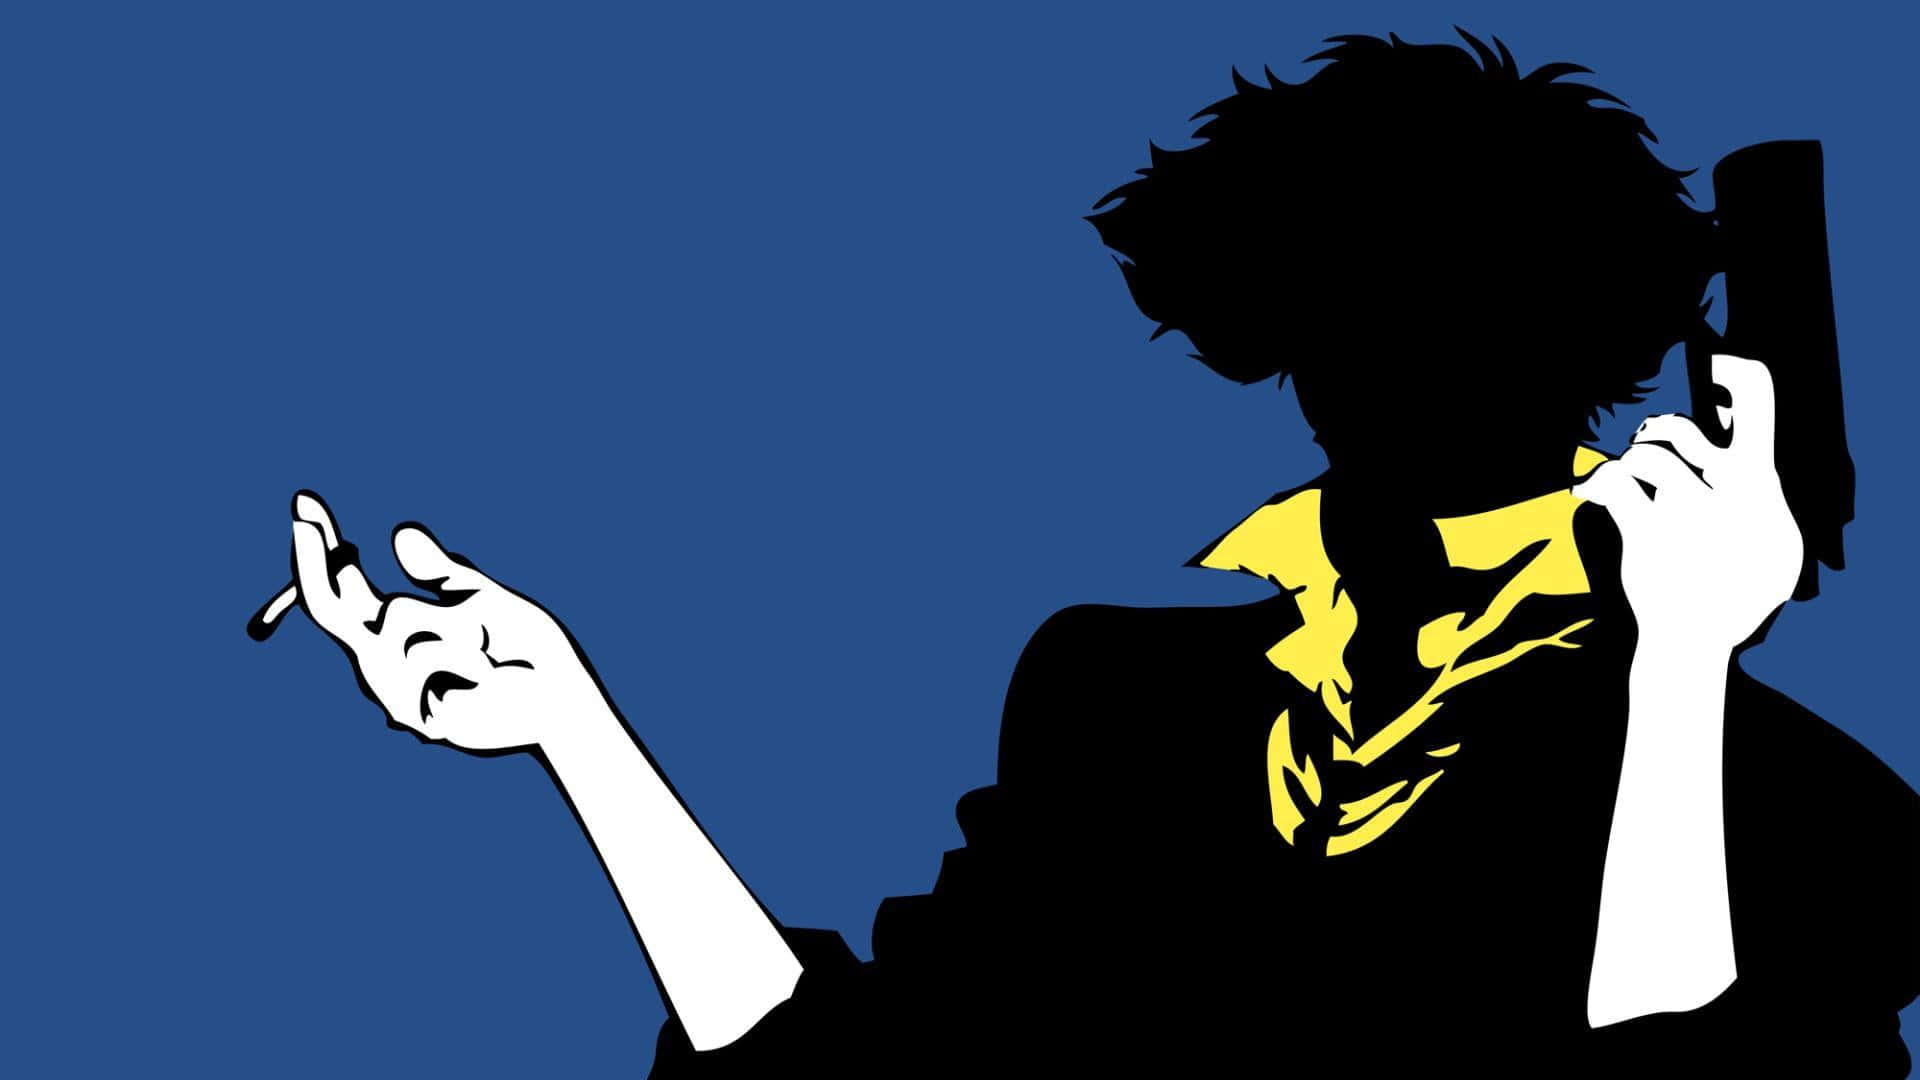 Relive the Cowboy Bebop experience